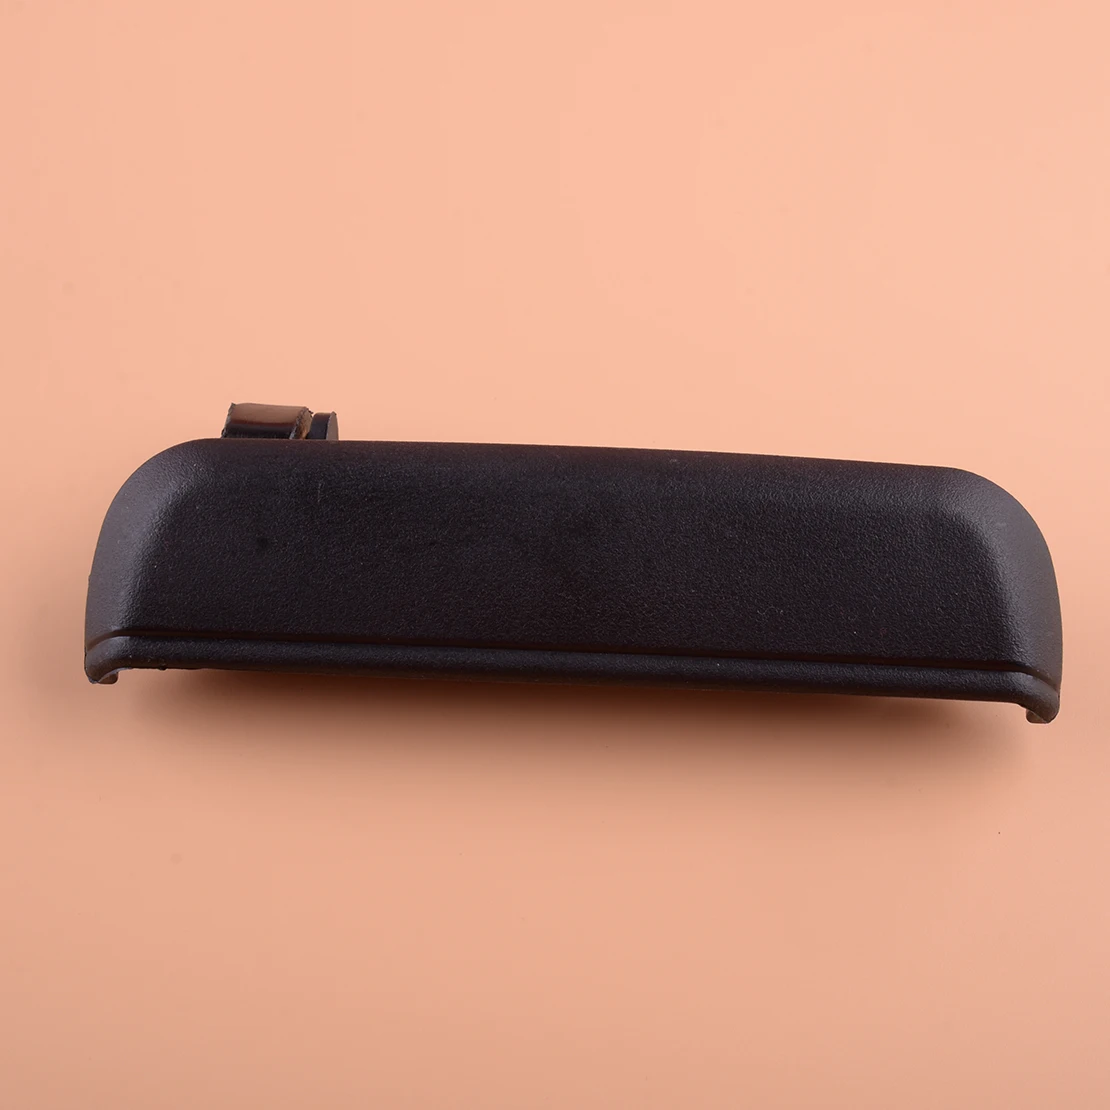 69230-16120 69230-16091 69230-0A010 69230-16090 Car Outer Rear Right Door Handle Fit For Toyota Tercel Paseo 1996 1997 1998